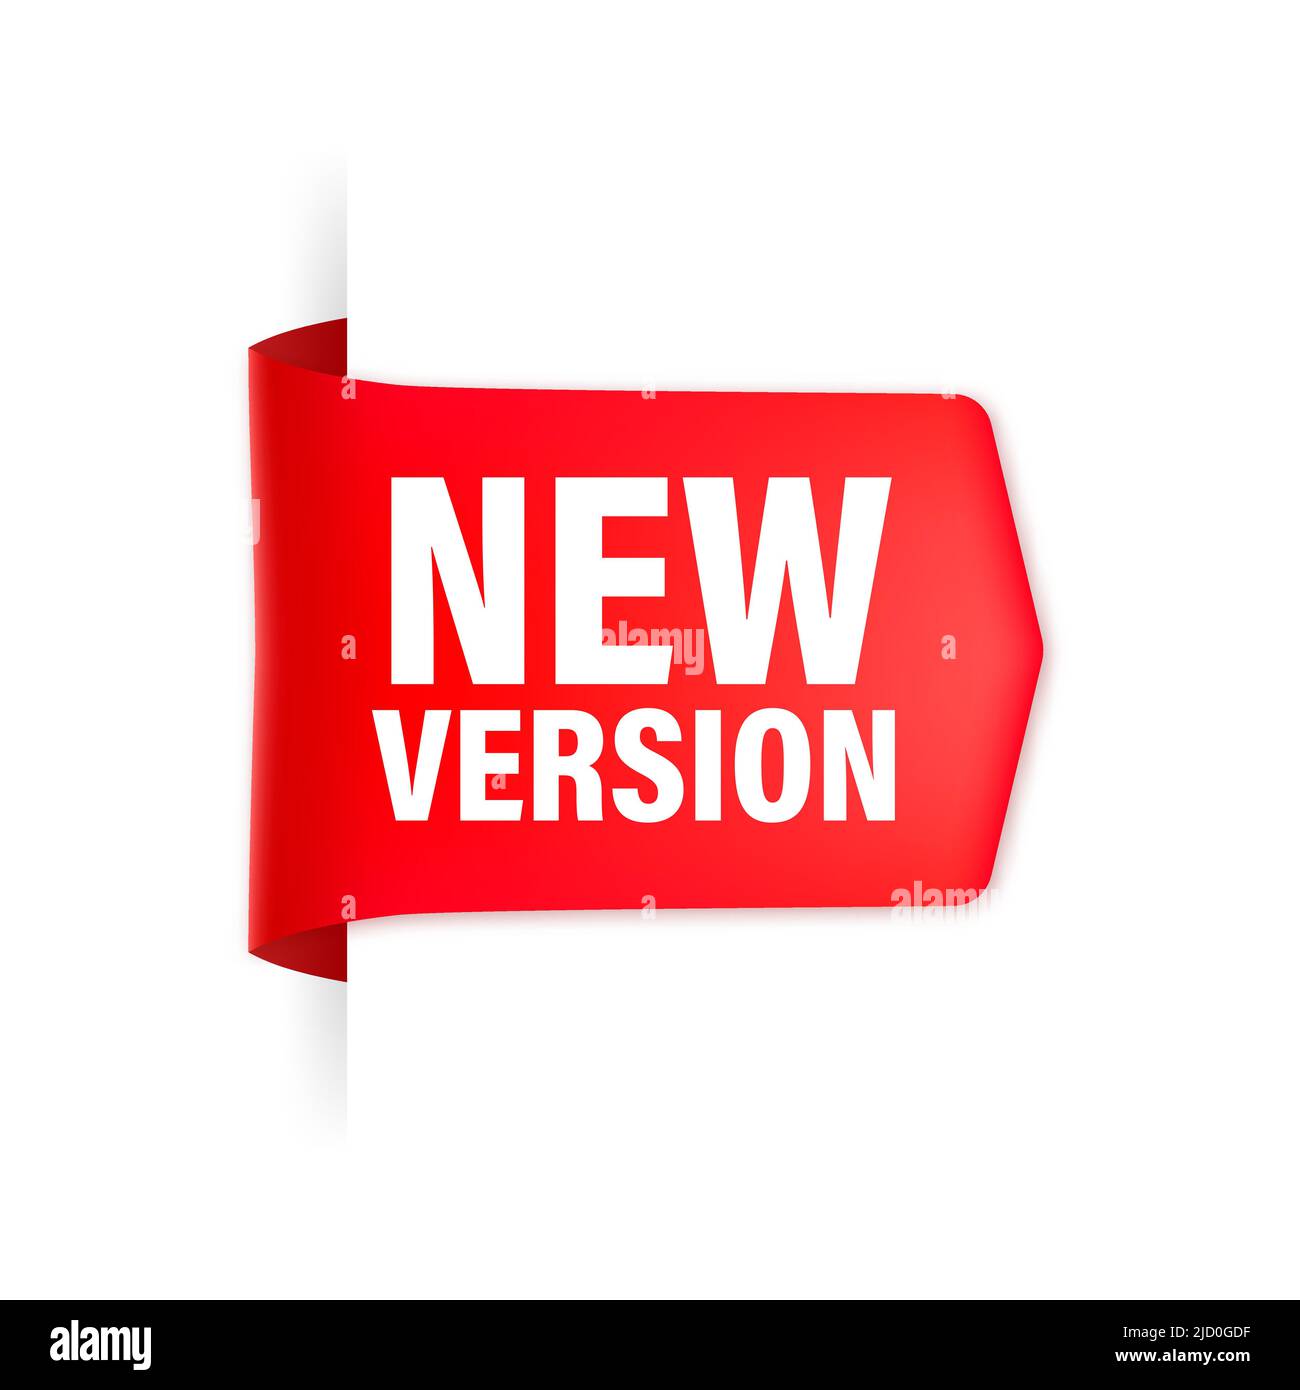 New version red label on white background. Red banner. Vector illustration. Stock Vector